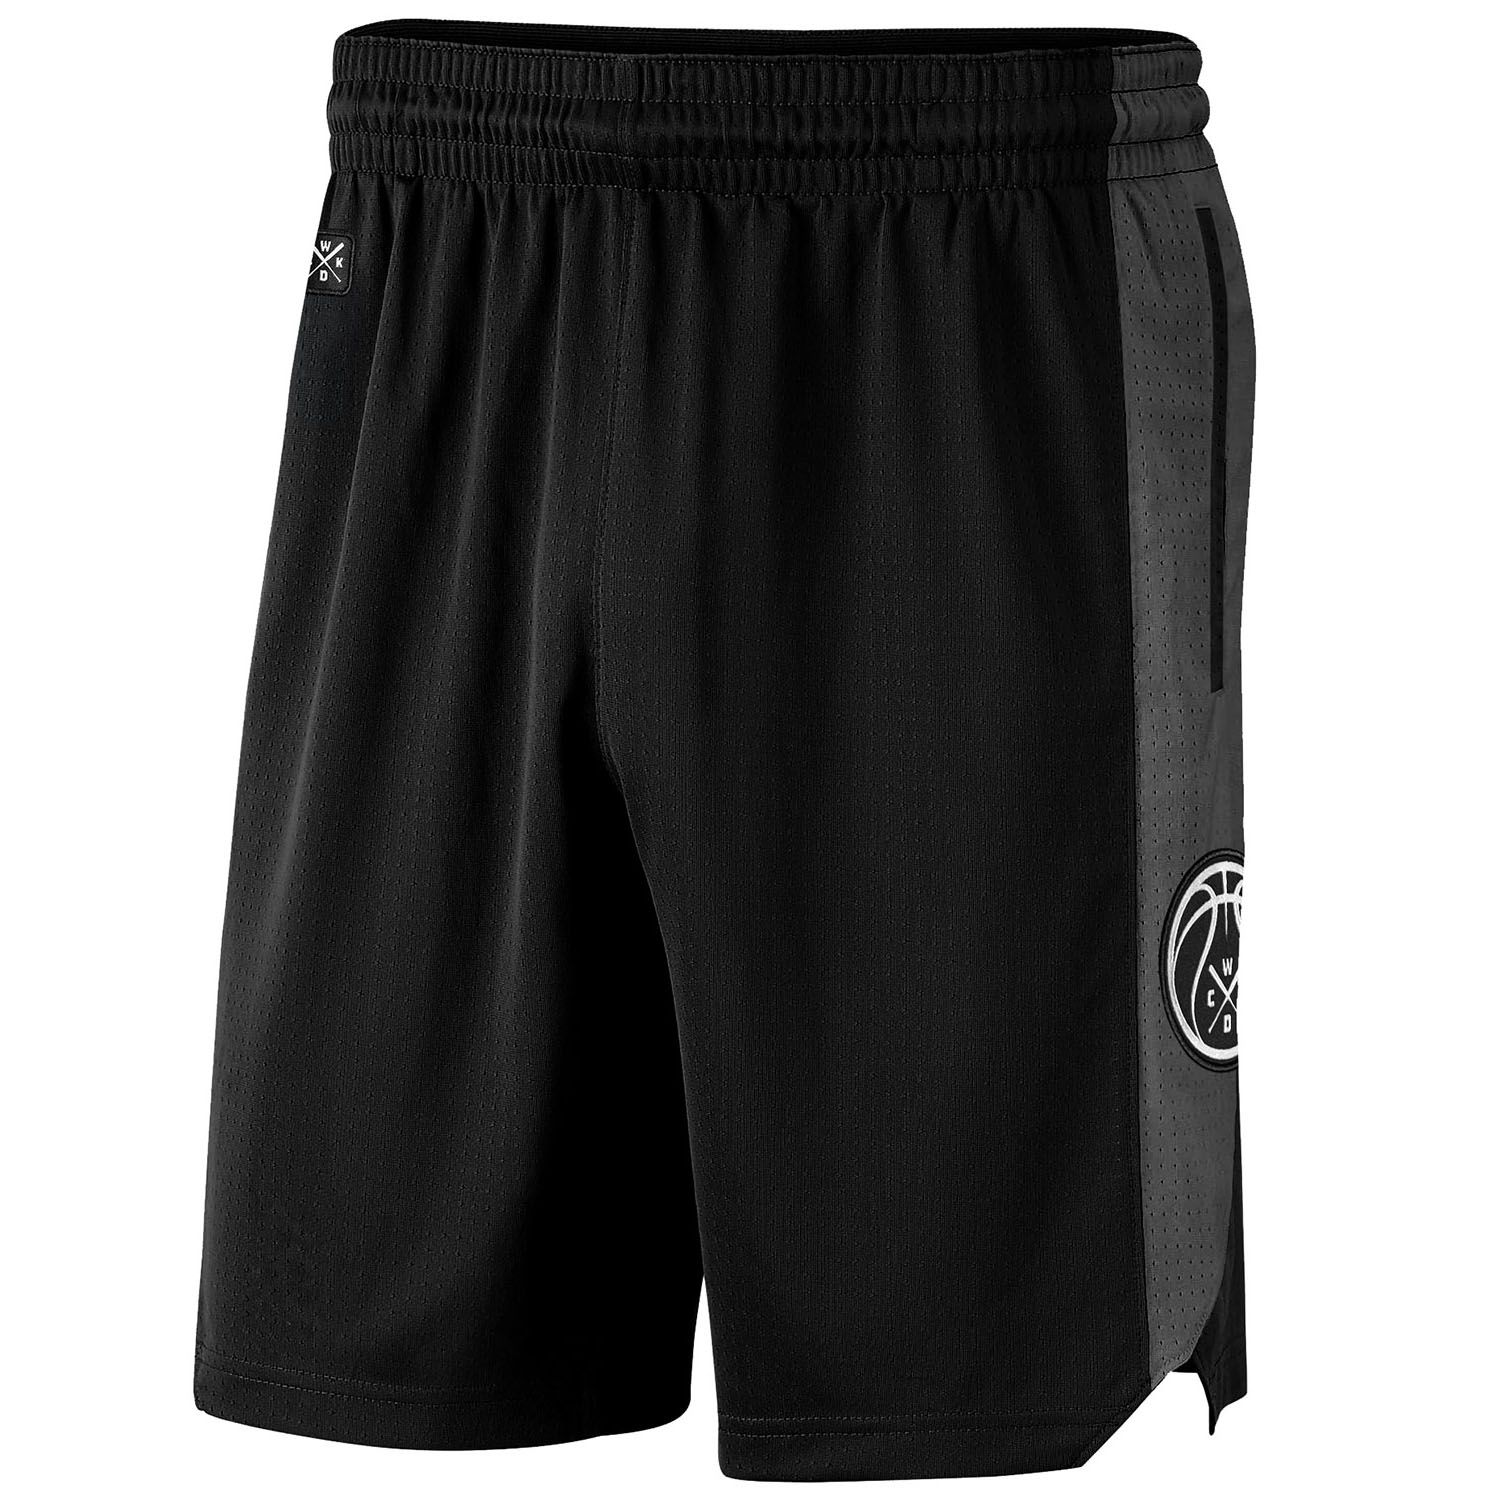 WICKED ONE Fitness Shorts, Highlight, black-grey